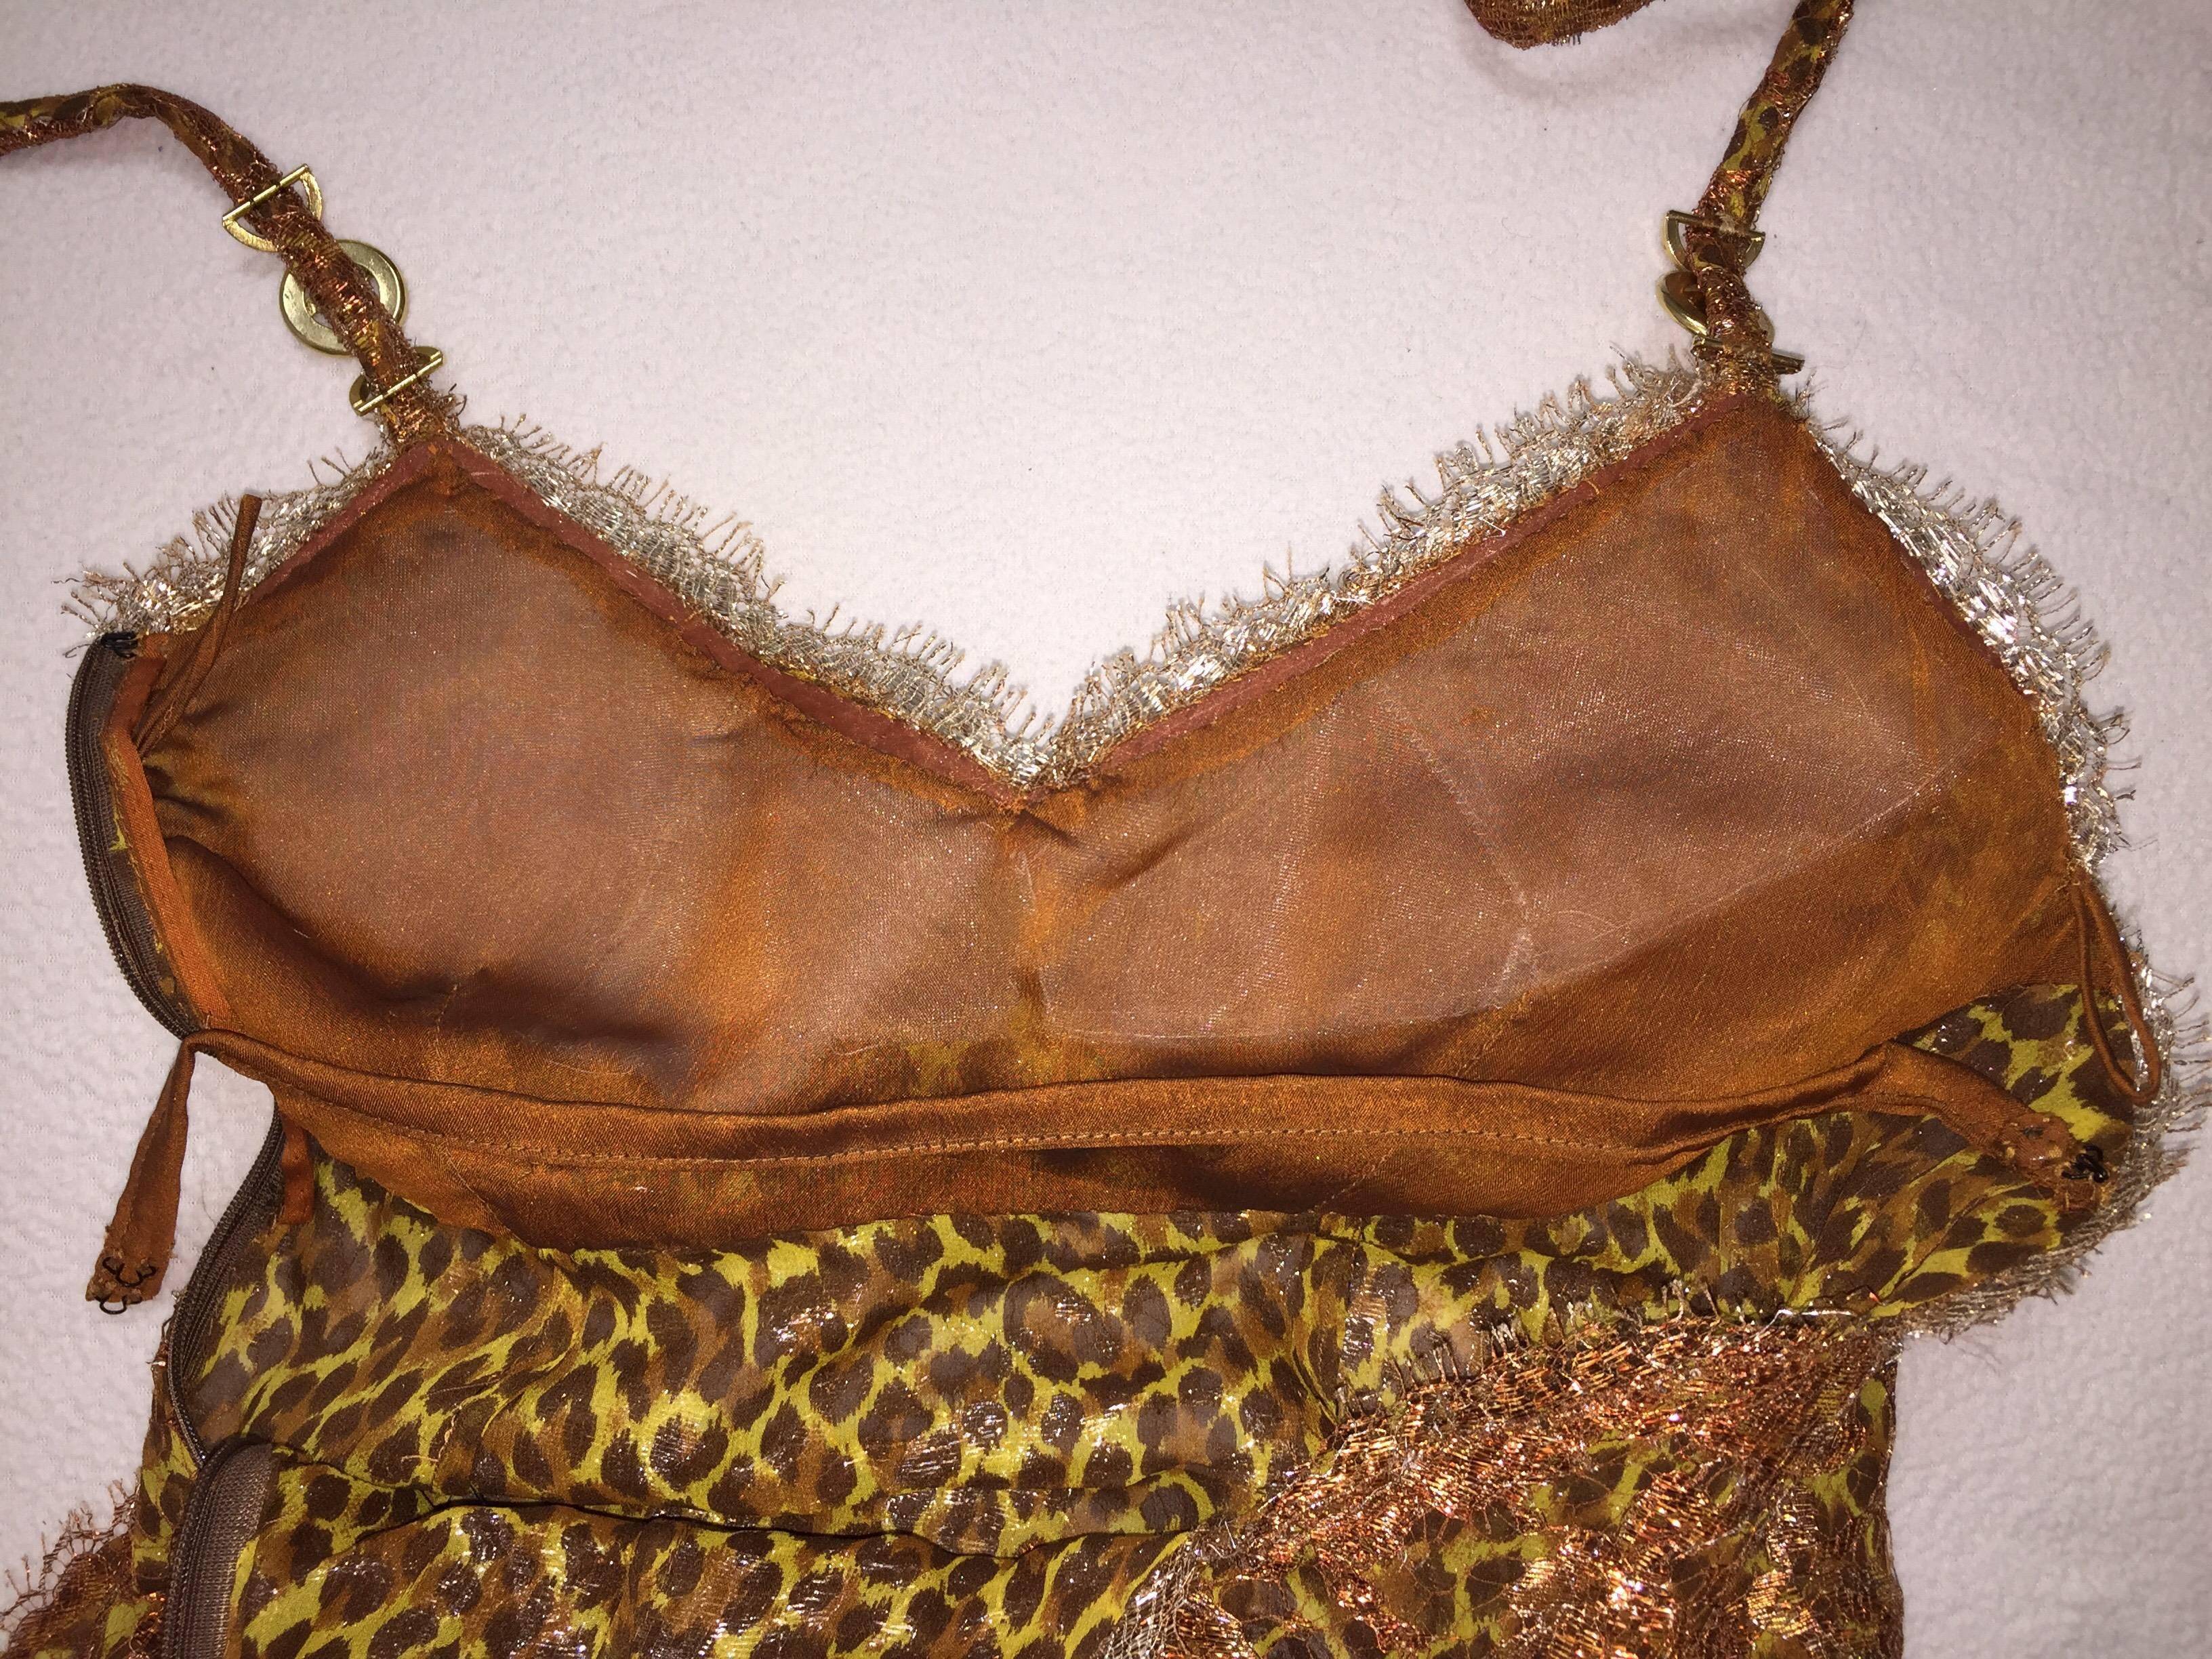 Brown S/S 1996 Atelier Versace Runway Gianni Sheer Leopard and Bronze Lace Mini Dress